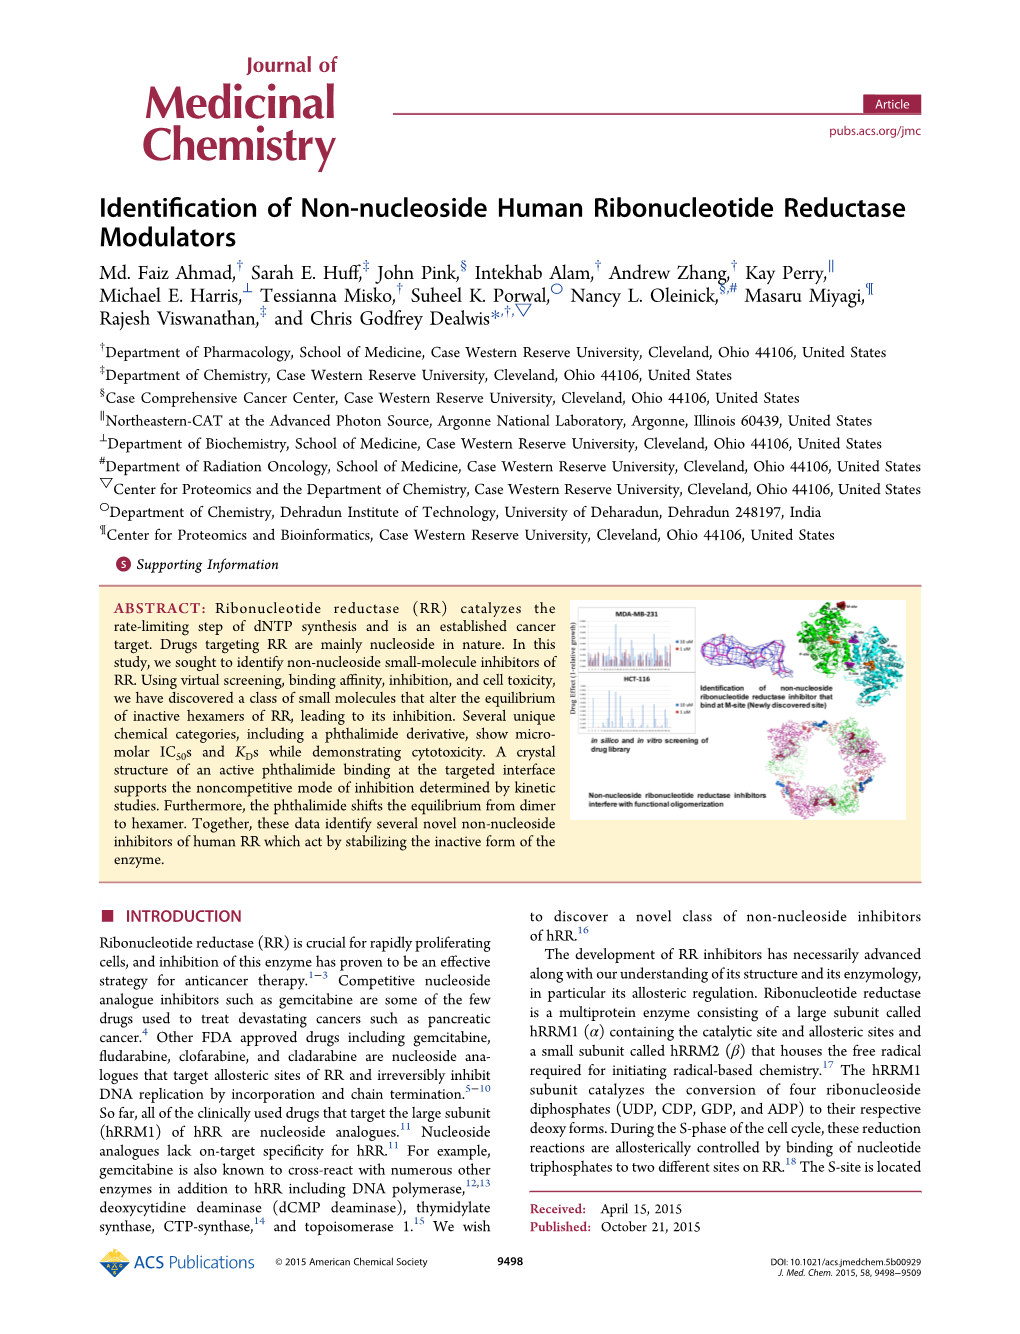 Identification of Non-Nucleoside Human Ribonucleotide Reductase